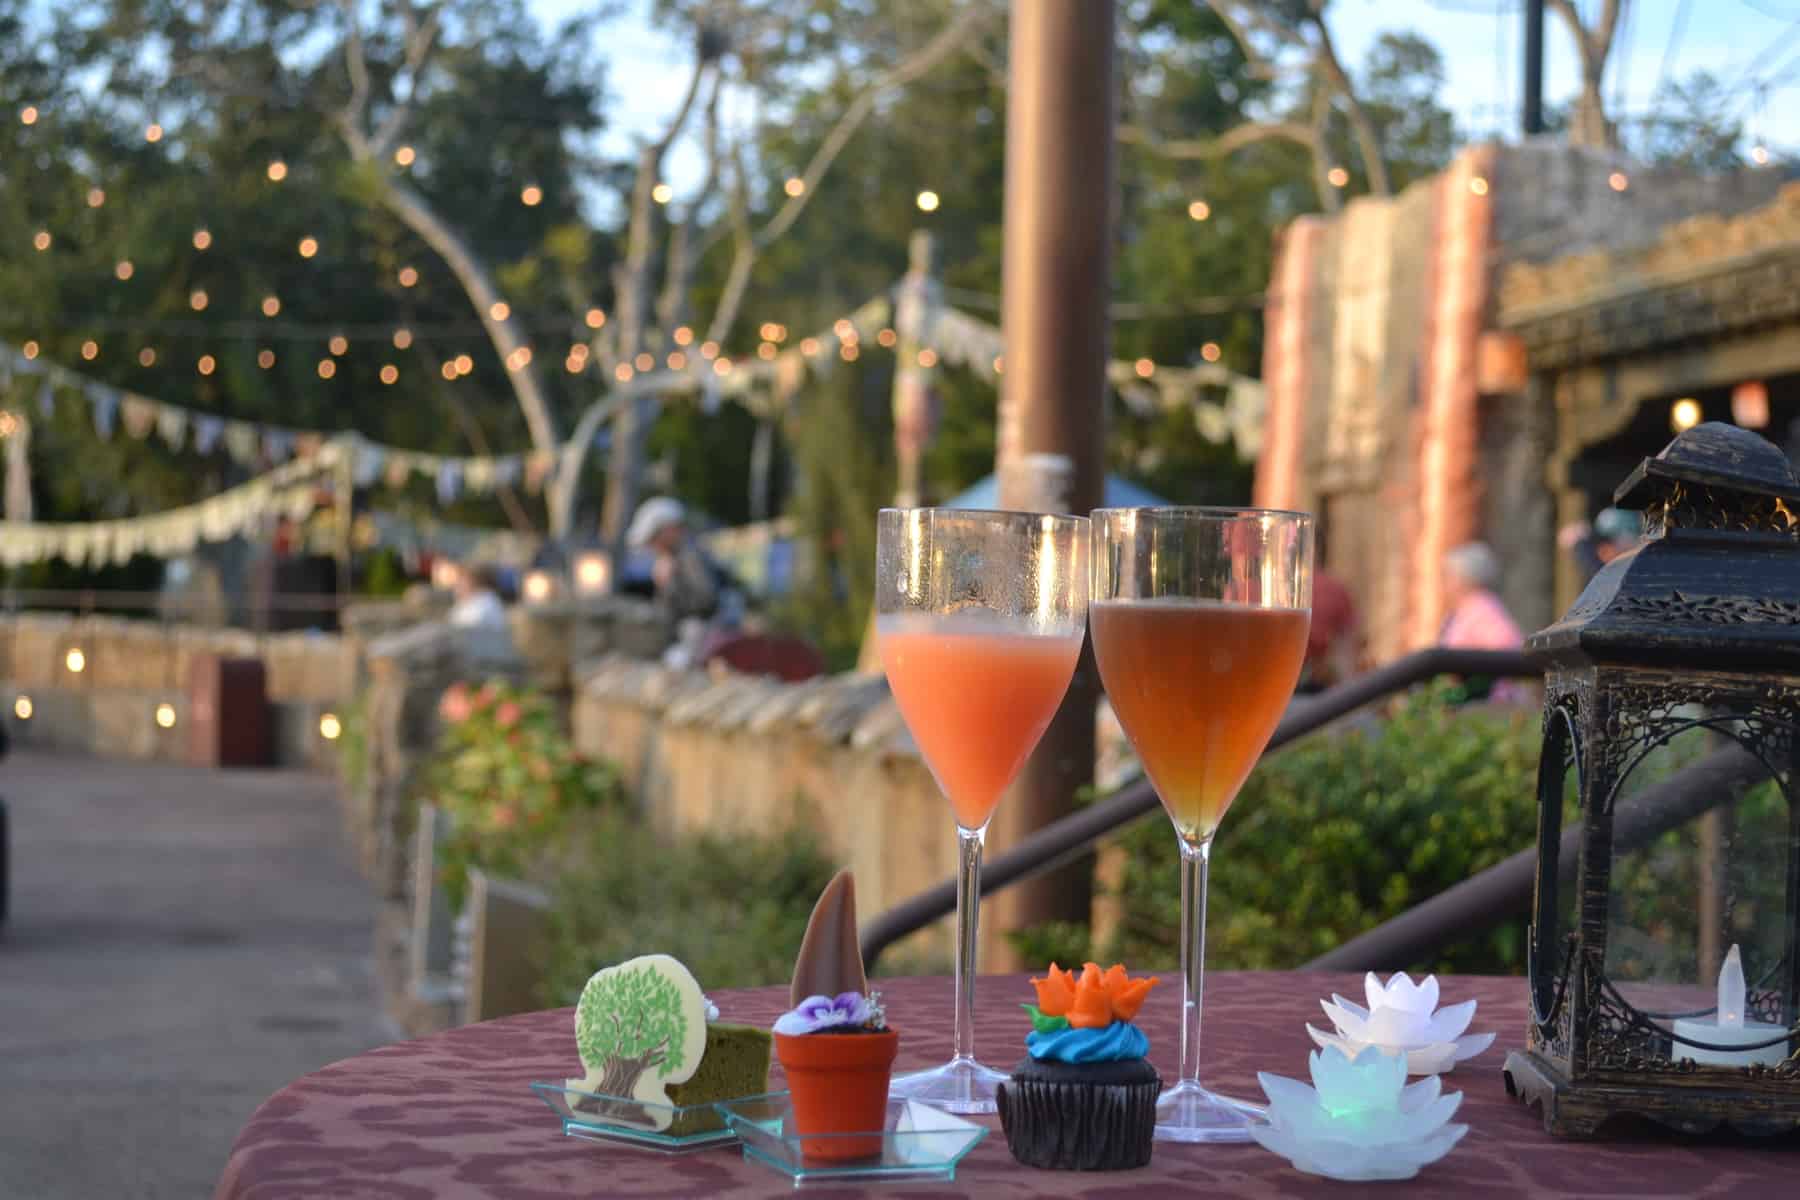 How (and when!) you can book a Dessert Party at Disney World